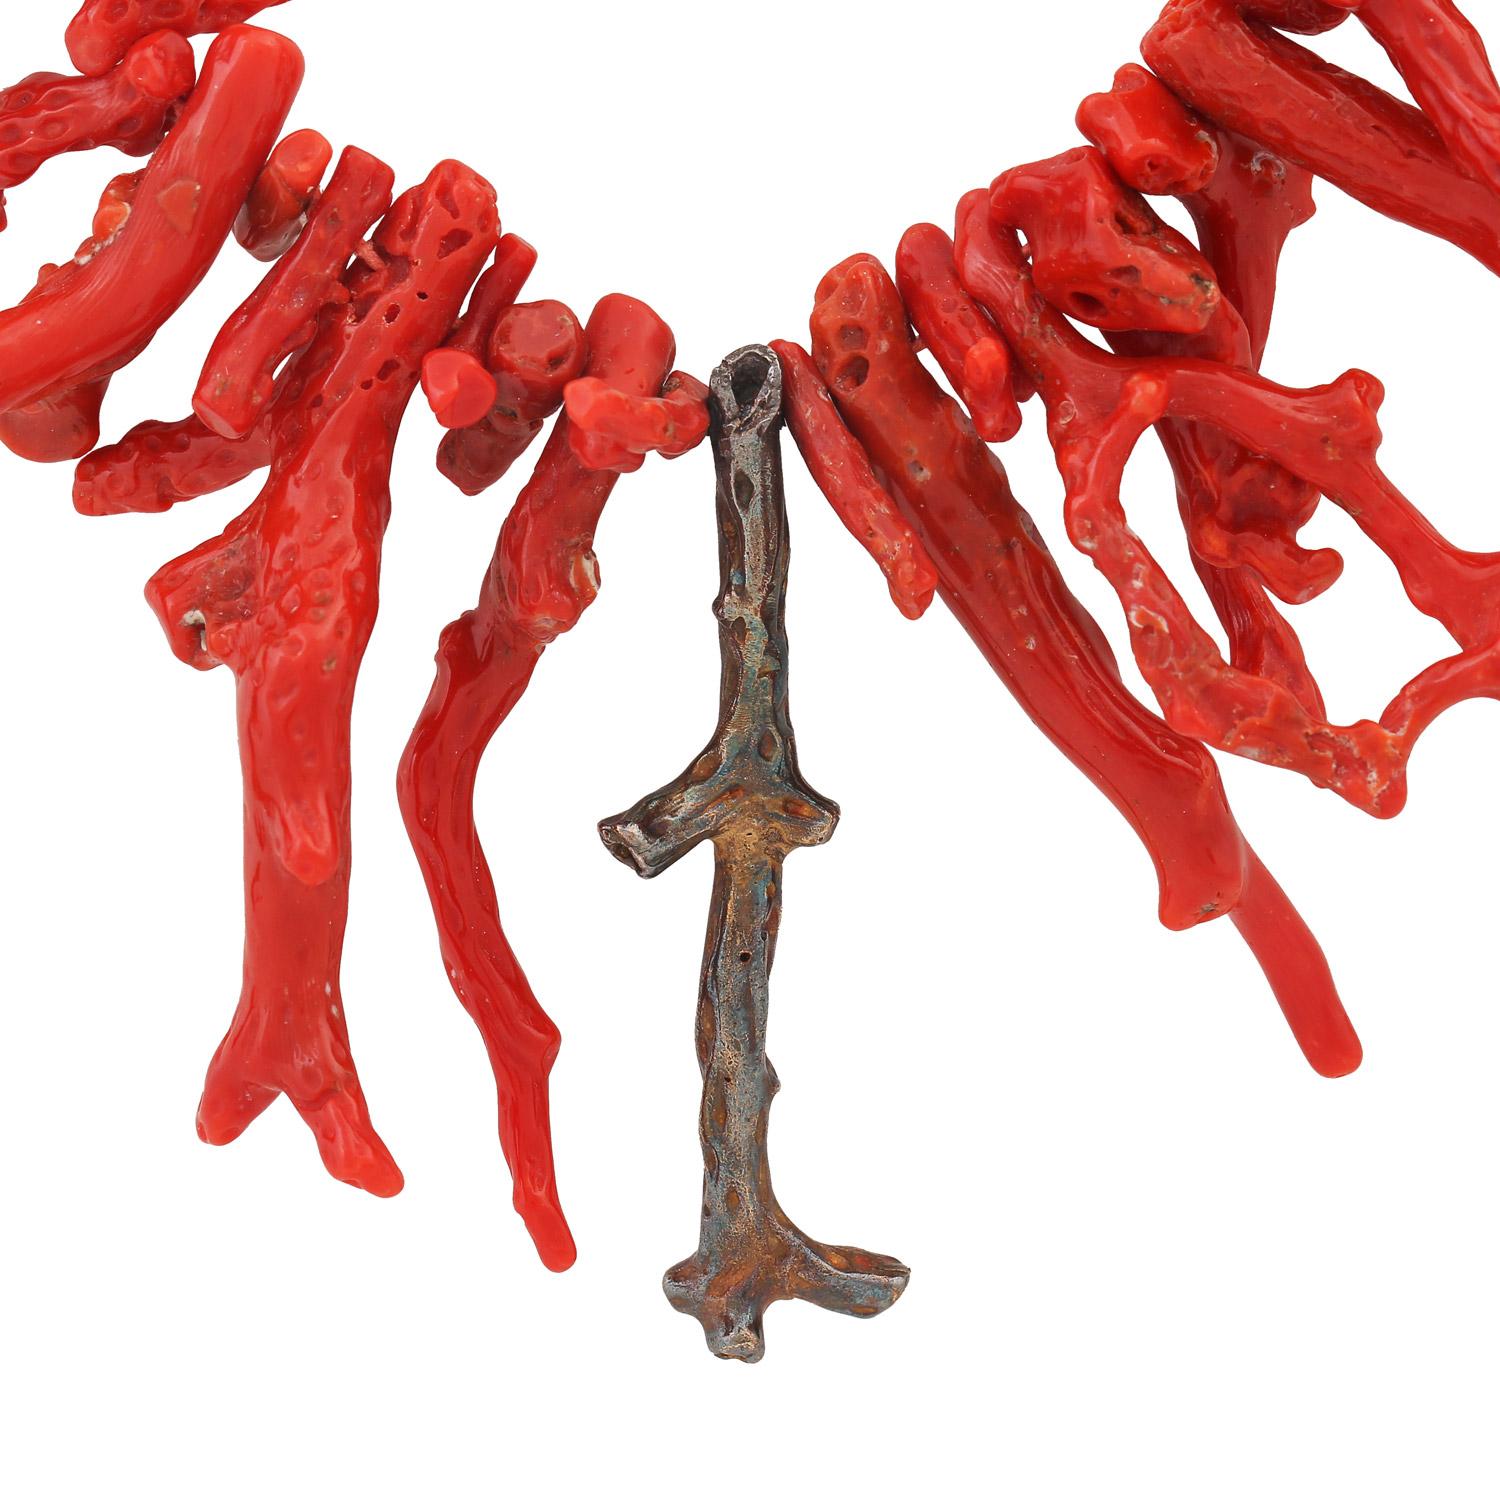 up to 7.5 cm, 1 silver branch, chain length approx. 61 cm, gilded silver clasp, 2nd half of the 20th century, signs of wear, 1 broken branch (loosely attached).

 Necklace made of branch coral up to 7.5 cm, 1 branch made of silver, necklace L: ca.